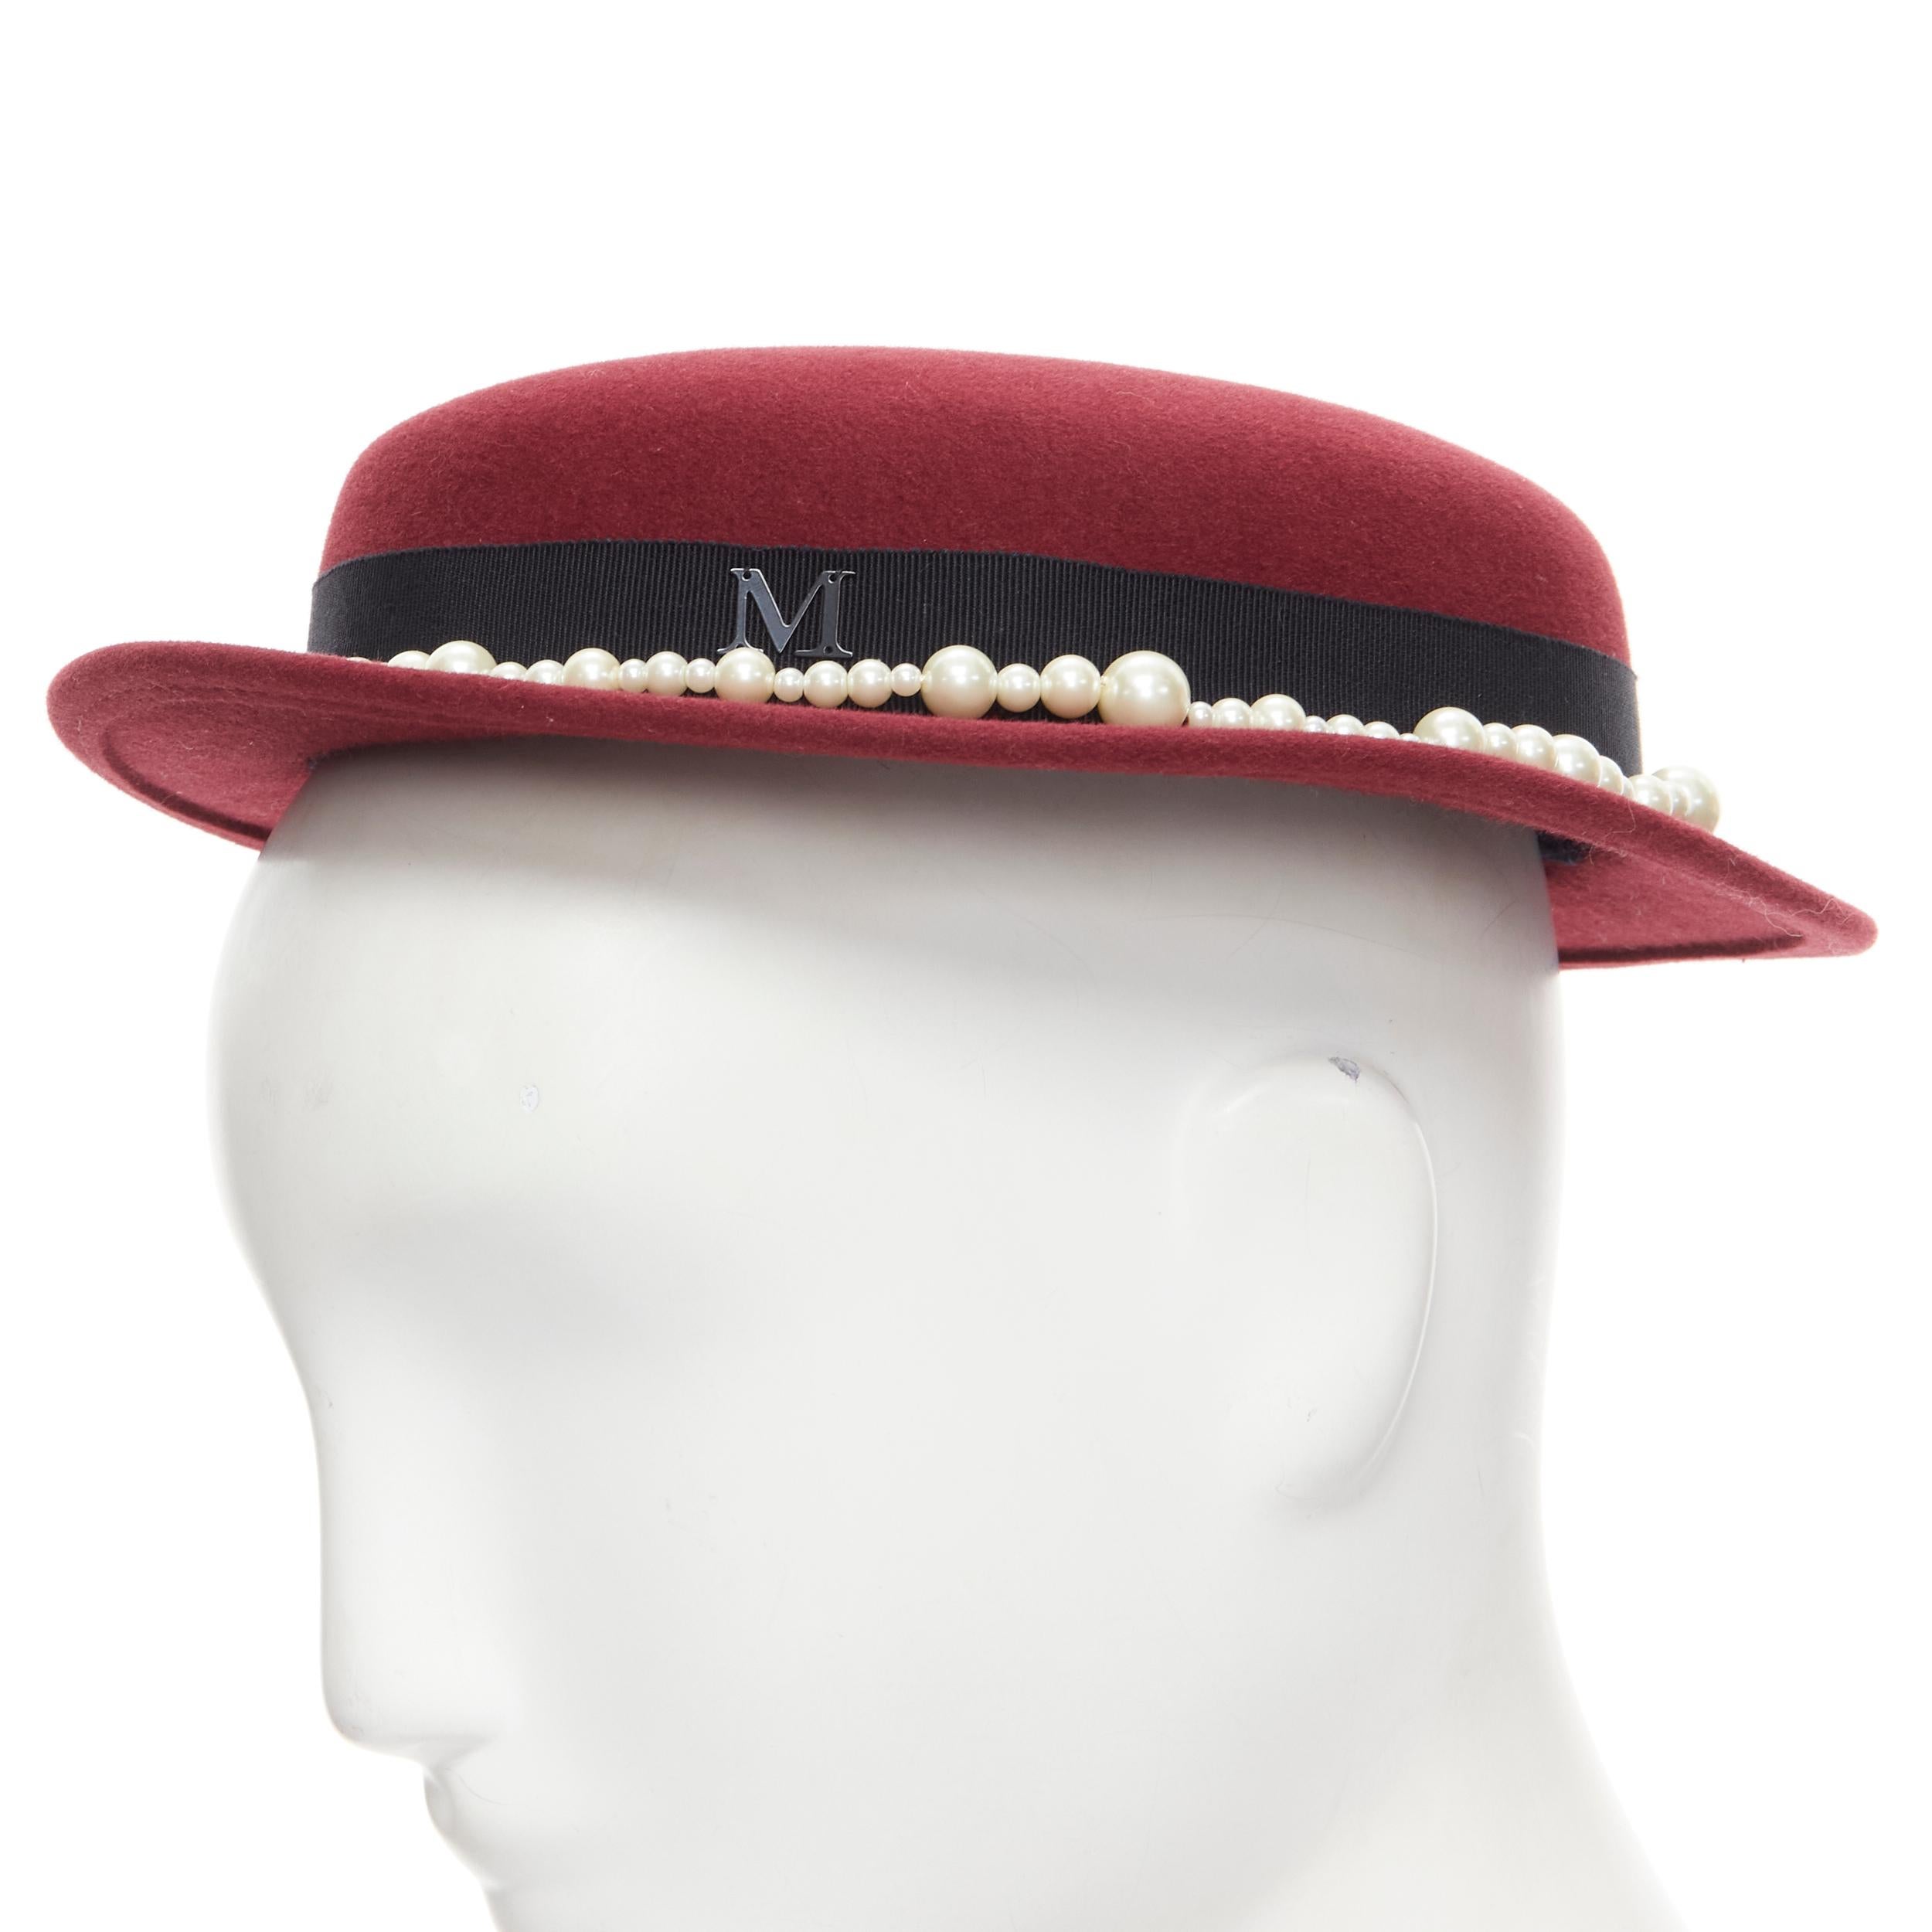 new MAISON MICHEL Melanie Pearles burgundy red wool felt topper fedora hat 54cm 
Reference: MELK/A00155 
Brand: Maison Michel 
Material: Wool 
Color: Burgundy 
Pattern: Solid 
Extra Detail: Faux pearl embellishment. 

CONDITION: 
Condition: New with